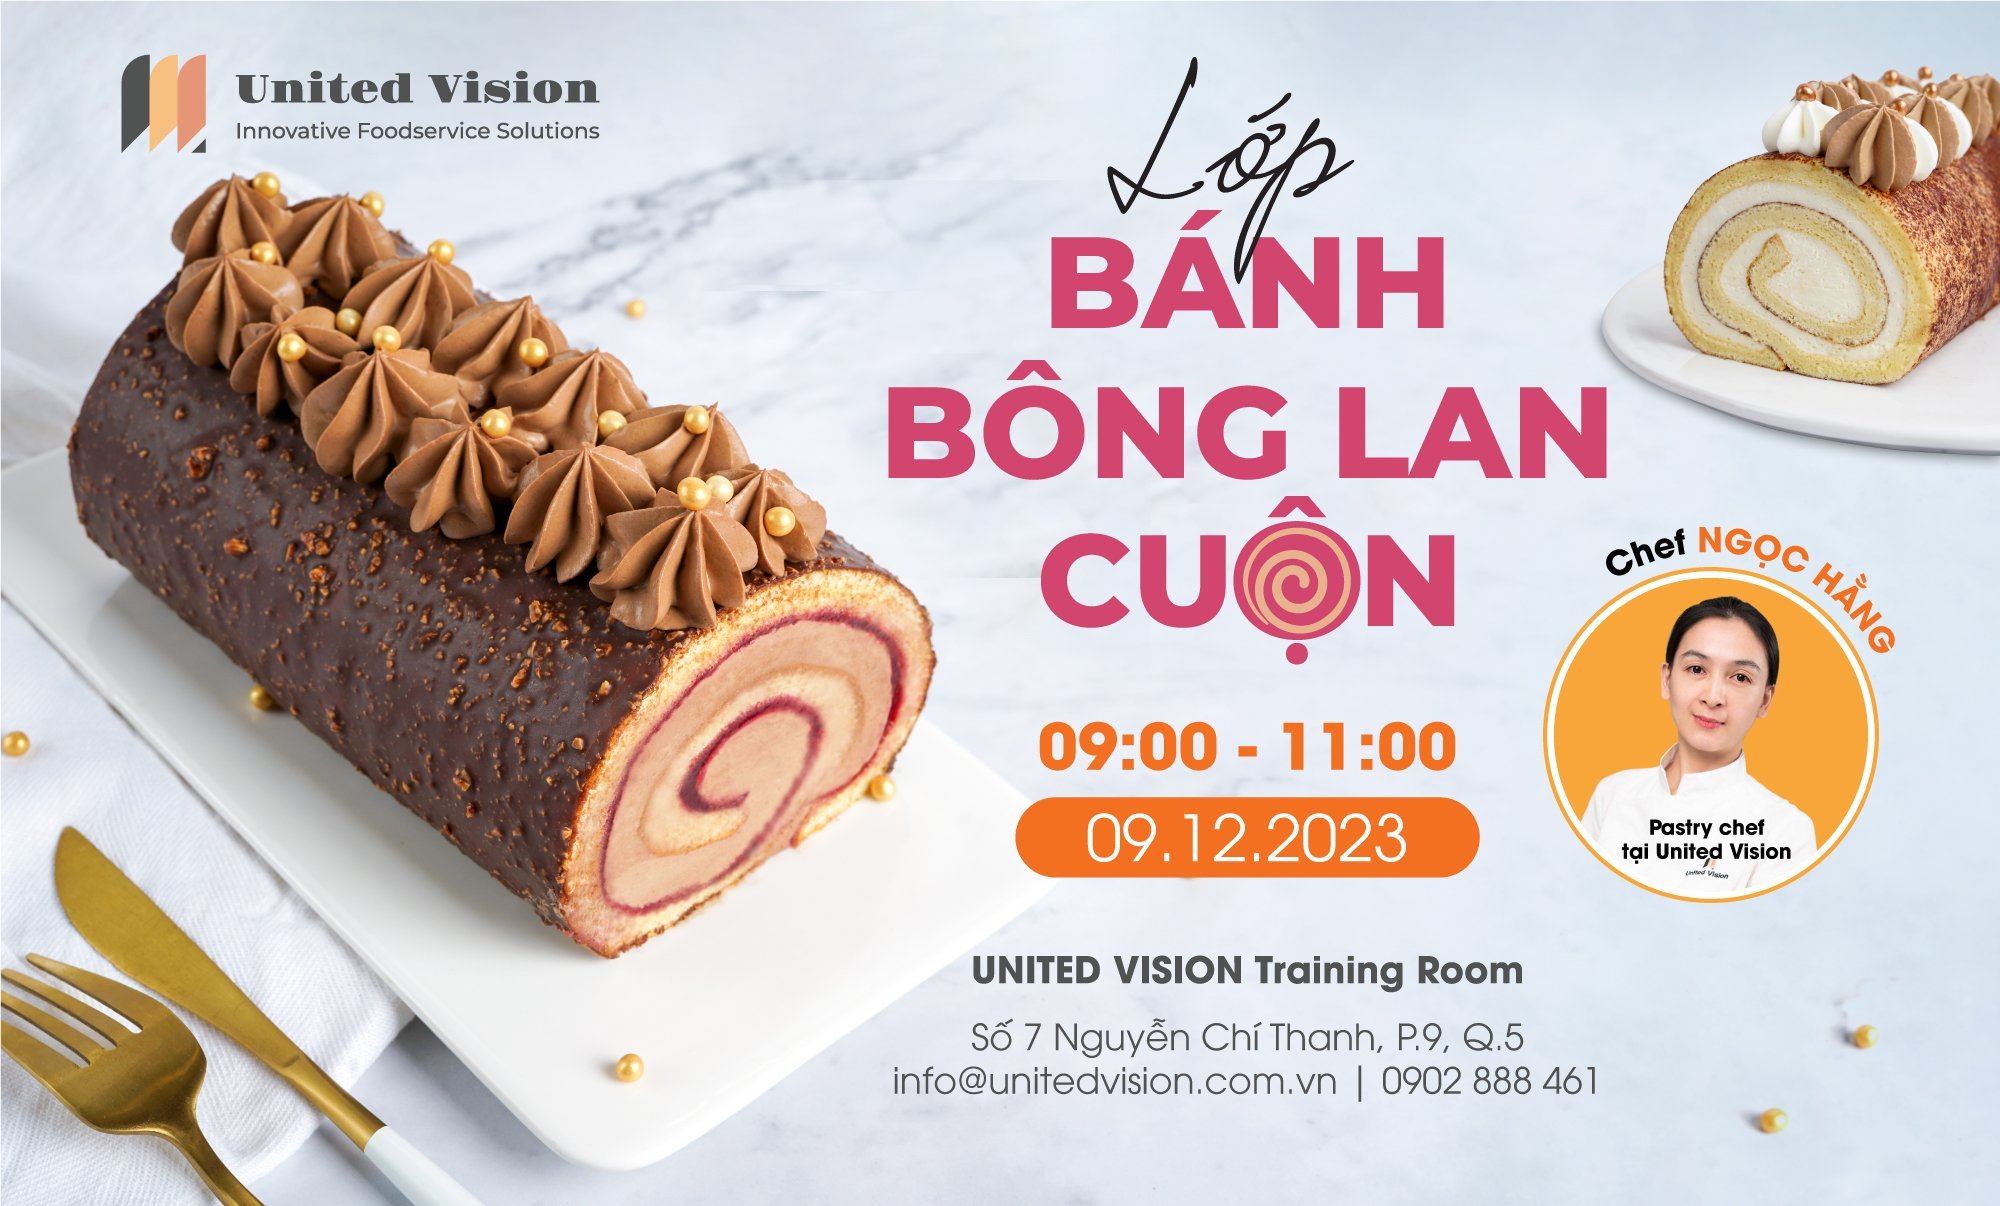 Roll Cake Class with Chef Hang at United Vision | Baking With UNOX Convection Oven